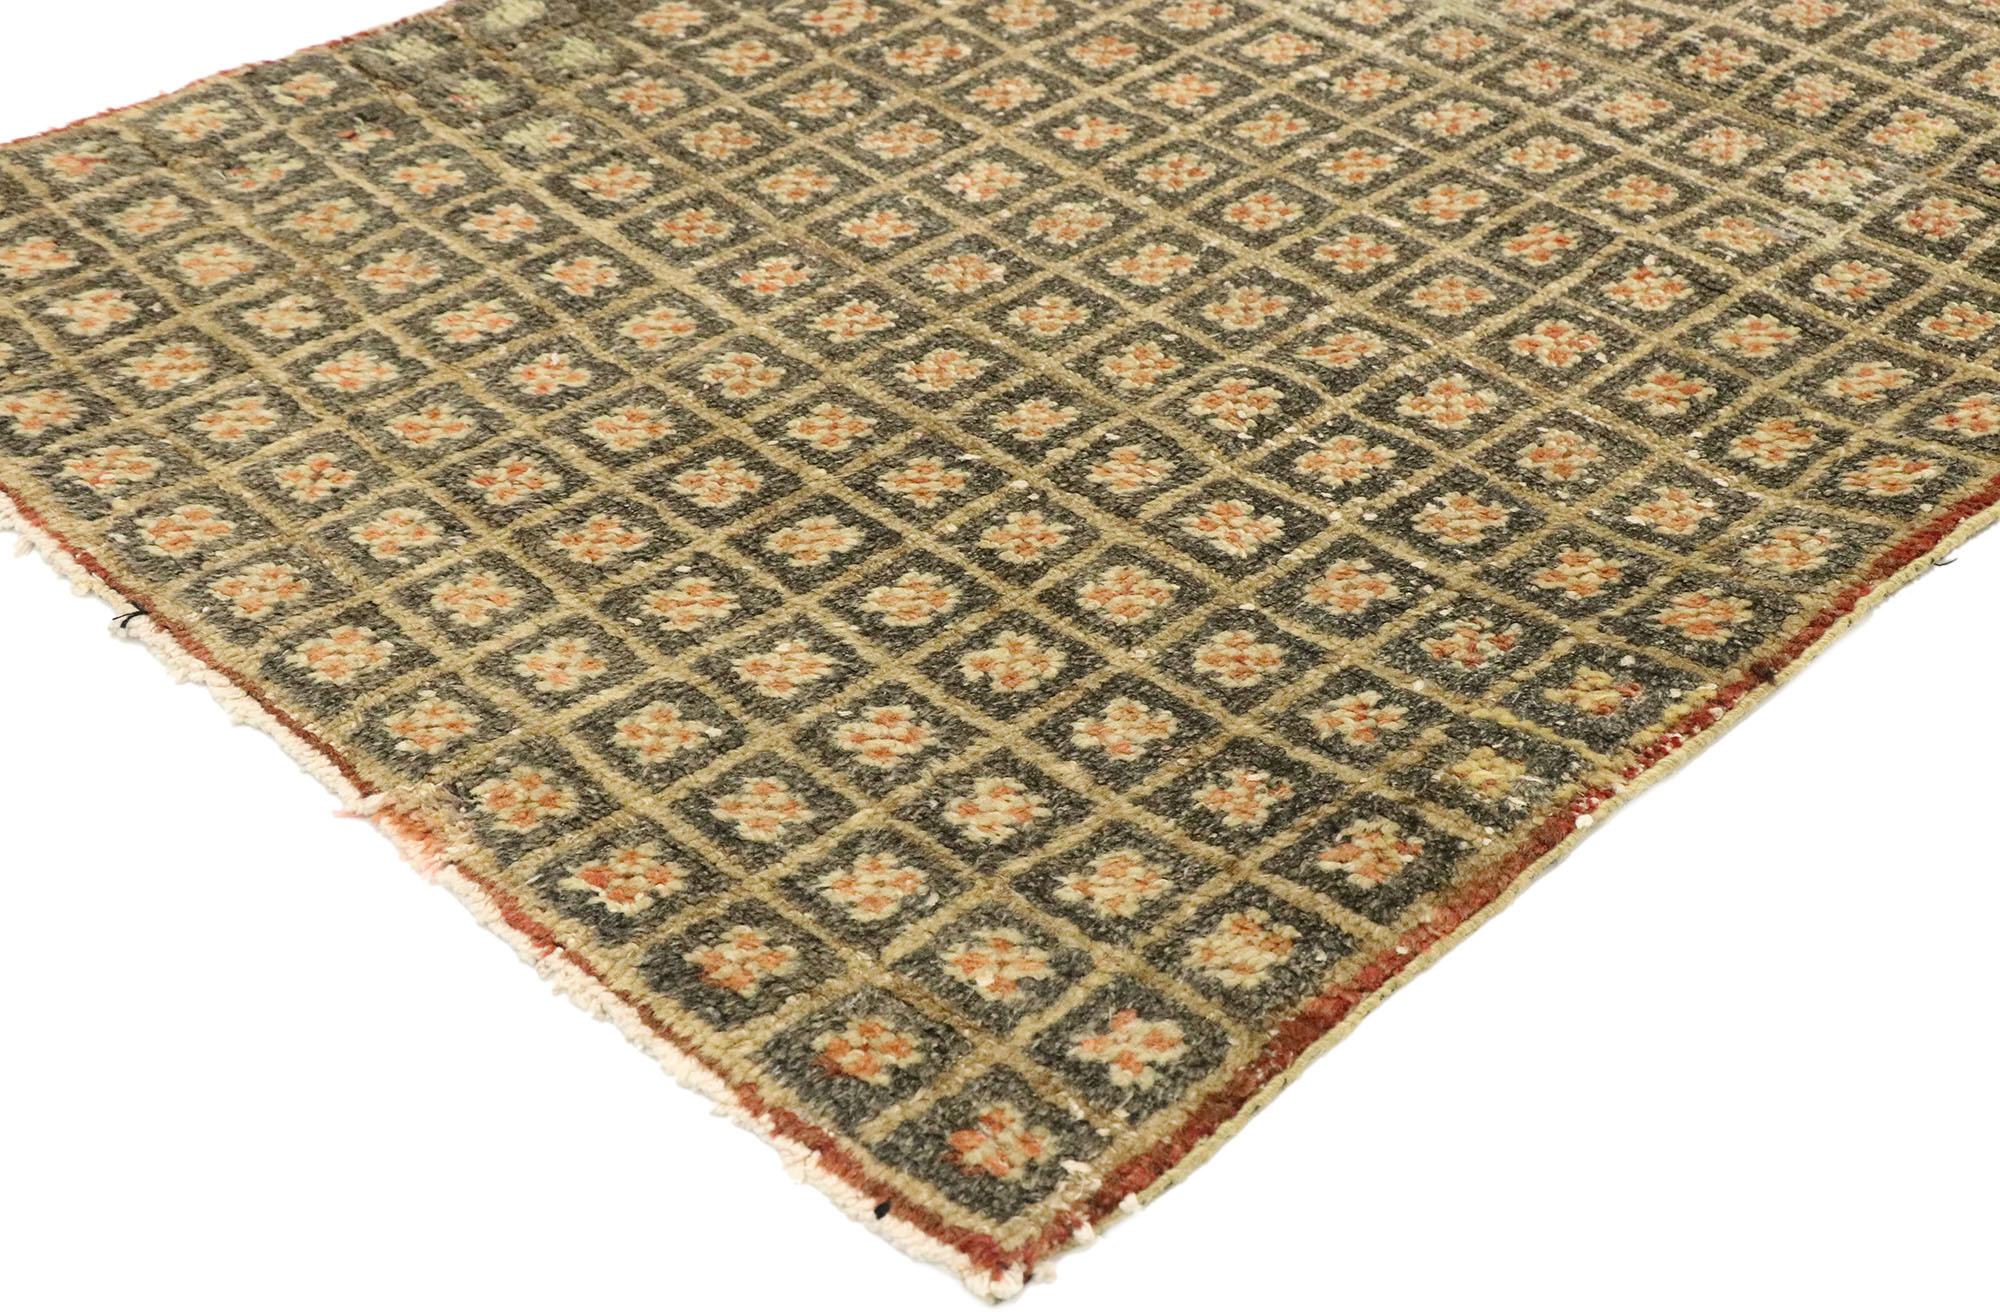 51564, distressed vintage Turkish Tulu accent rug with Mid-Century Modern cubist style. This hand knotted wool distressed vintage Turkish Tulu rug with Mid-Century Modern and cubist style is composed of horizontal and vertical lines creating an